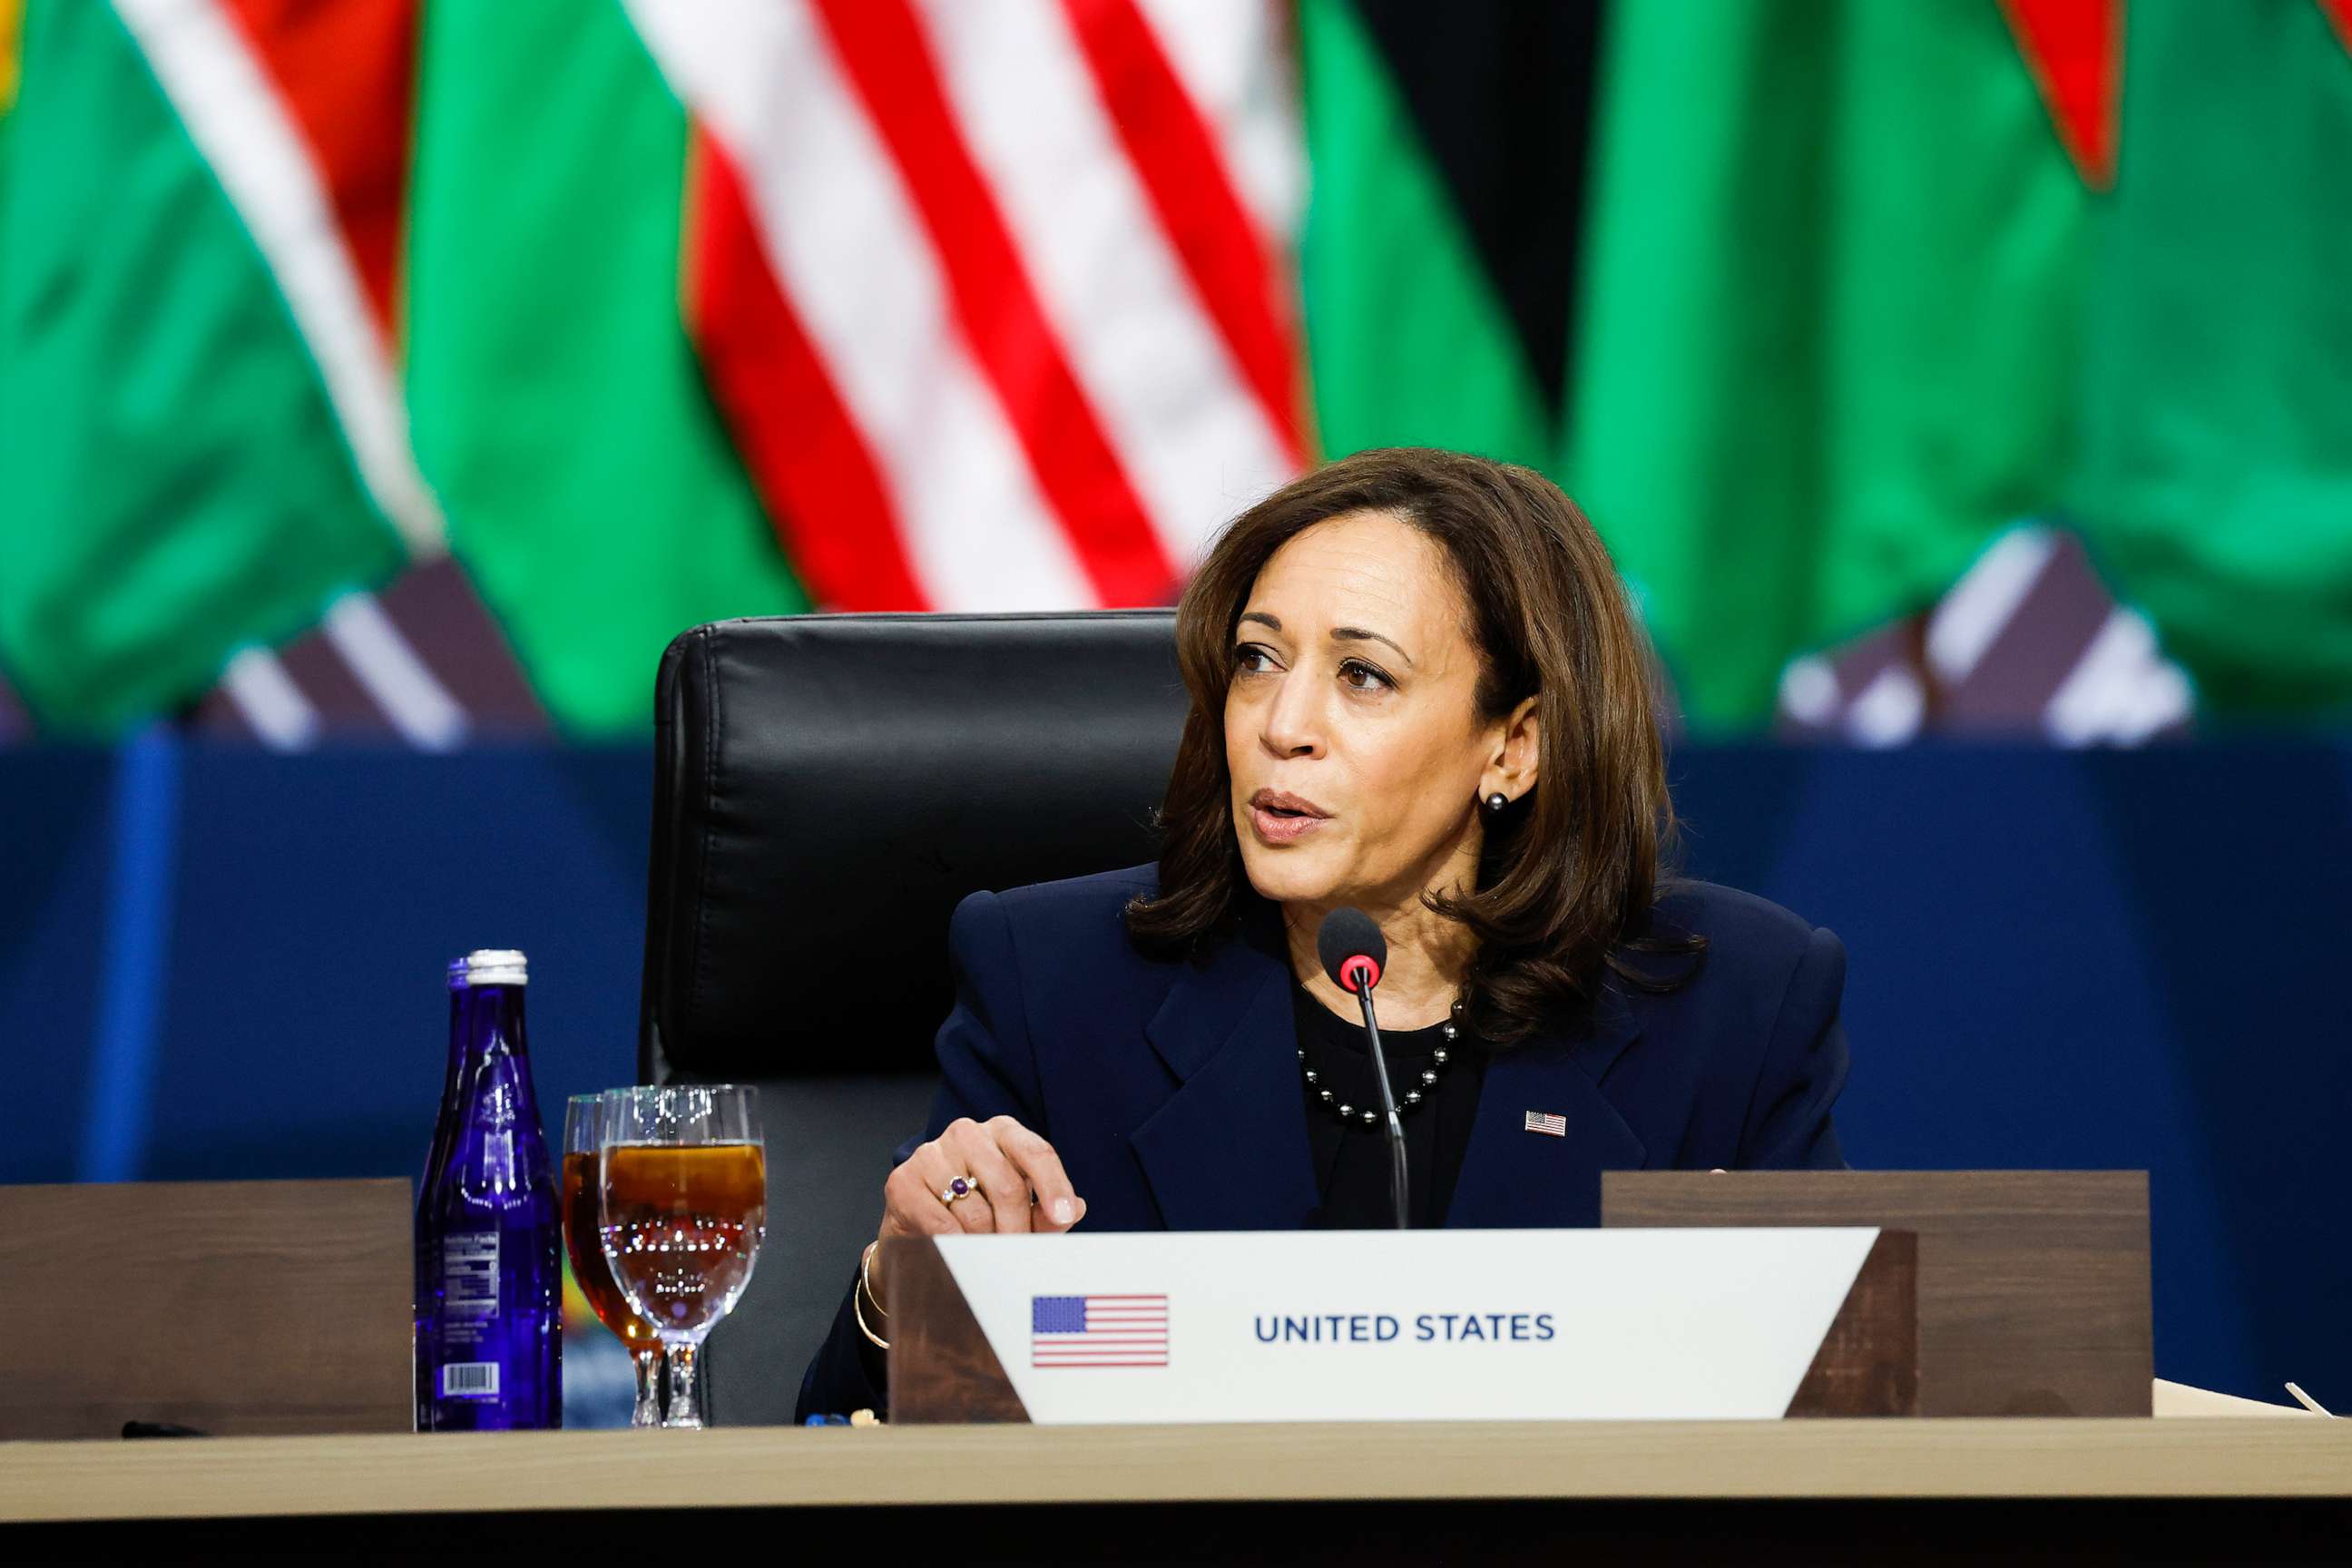 PHOTO: In this Dec. 15, 2022, file photo, Vice President Kamala Harris speaks at a working lunch at the U.S. - Africa Leaders Summit in Washington, DC.